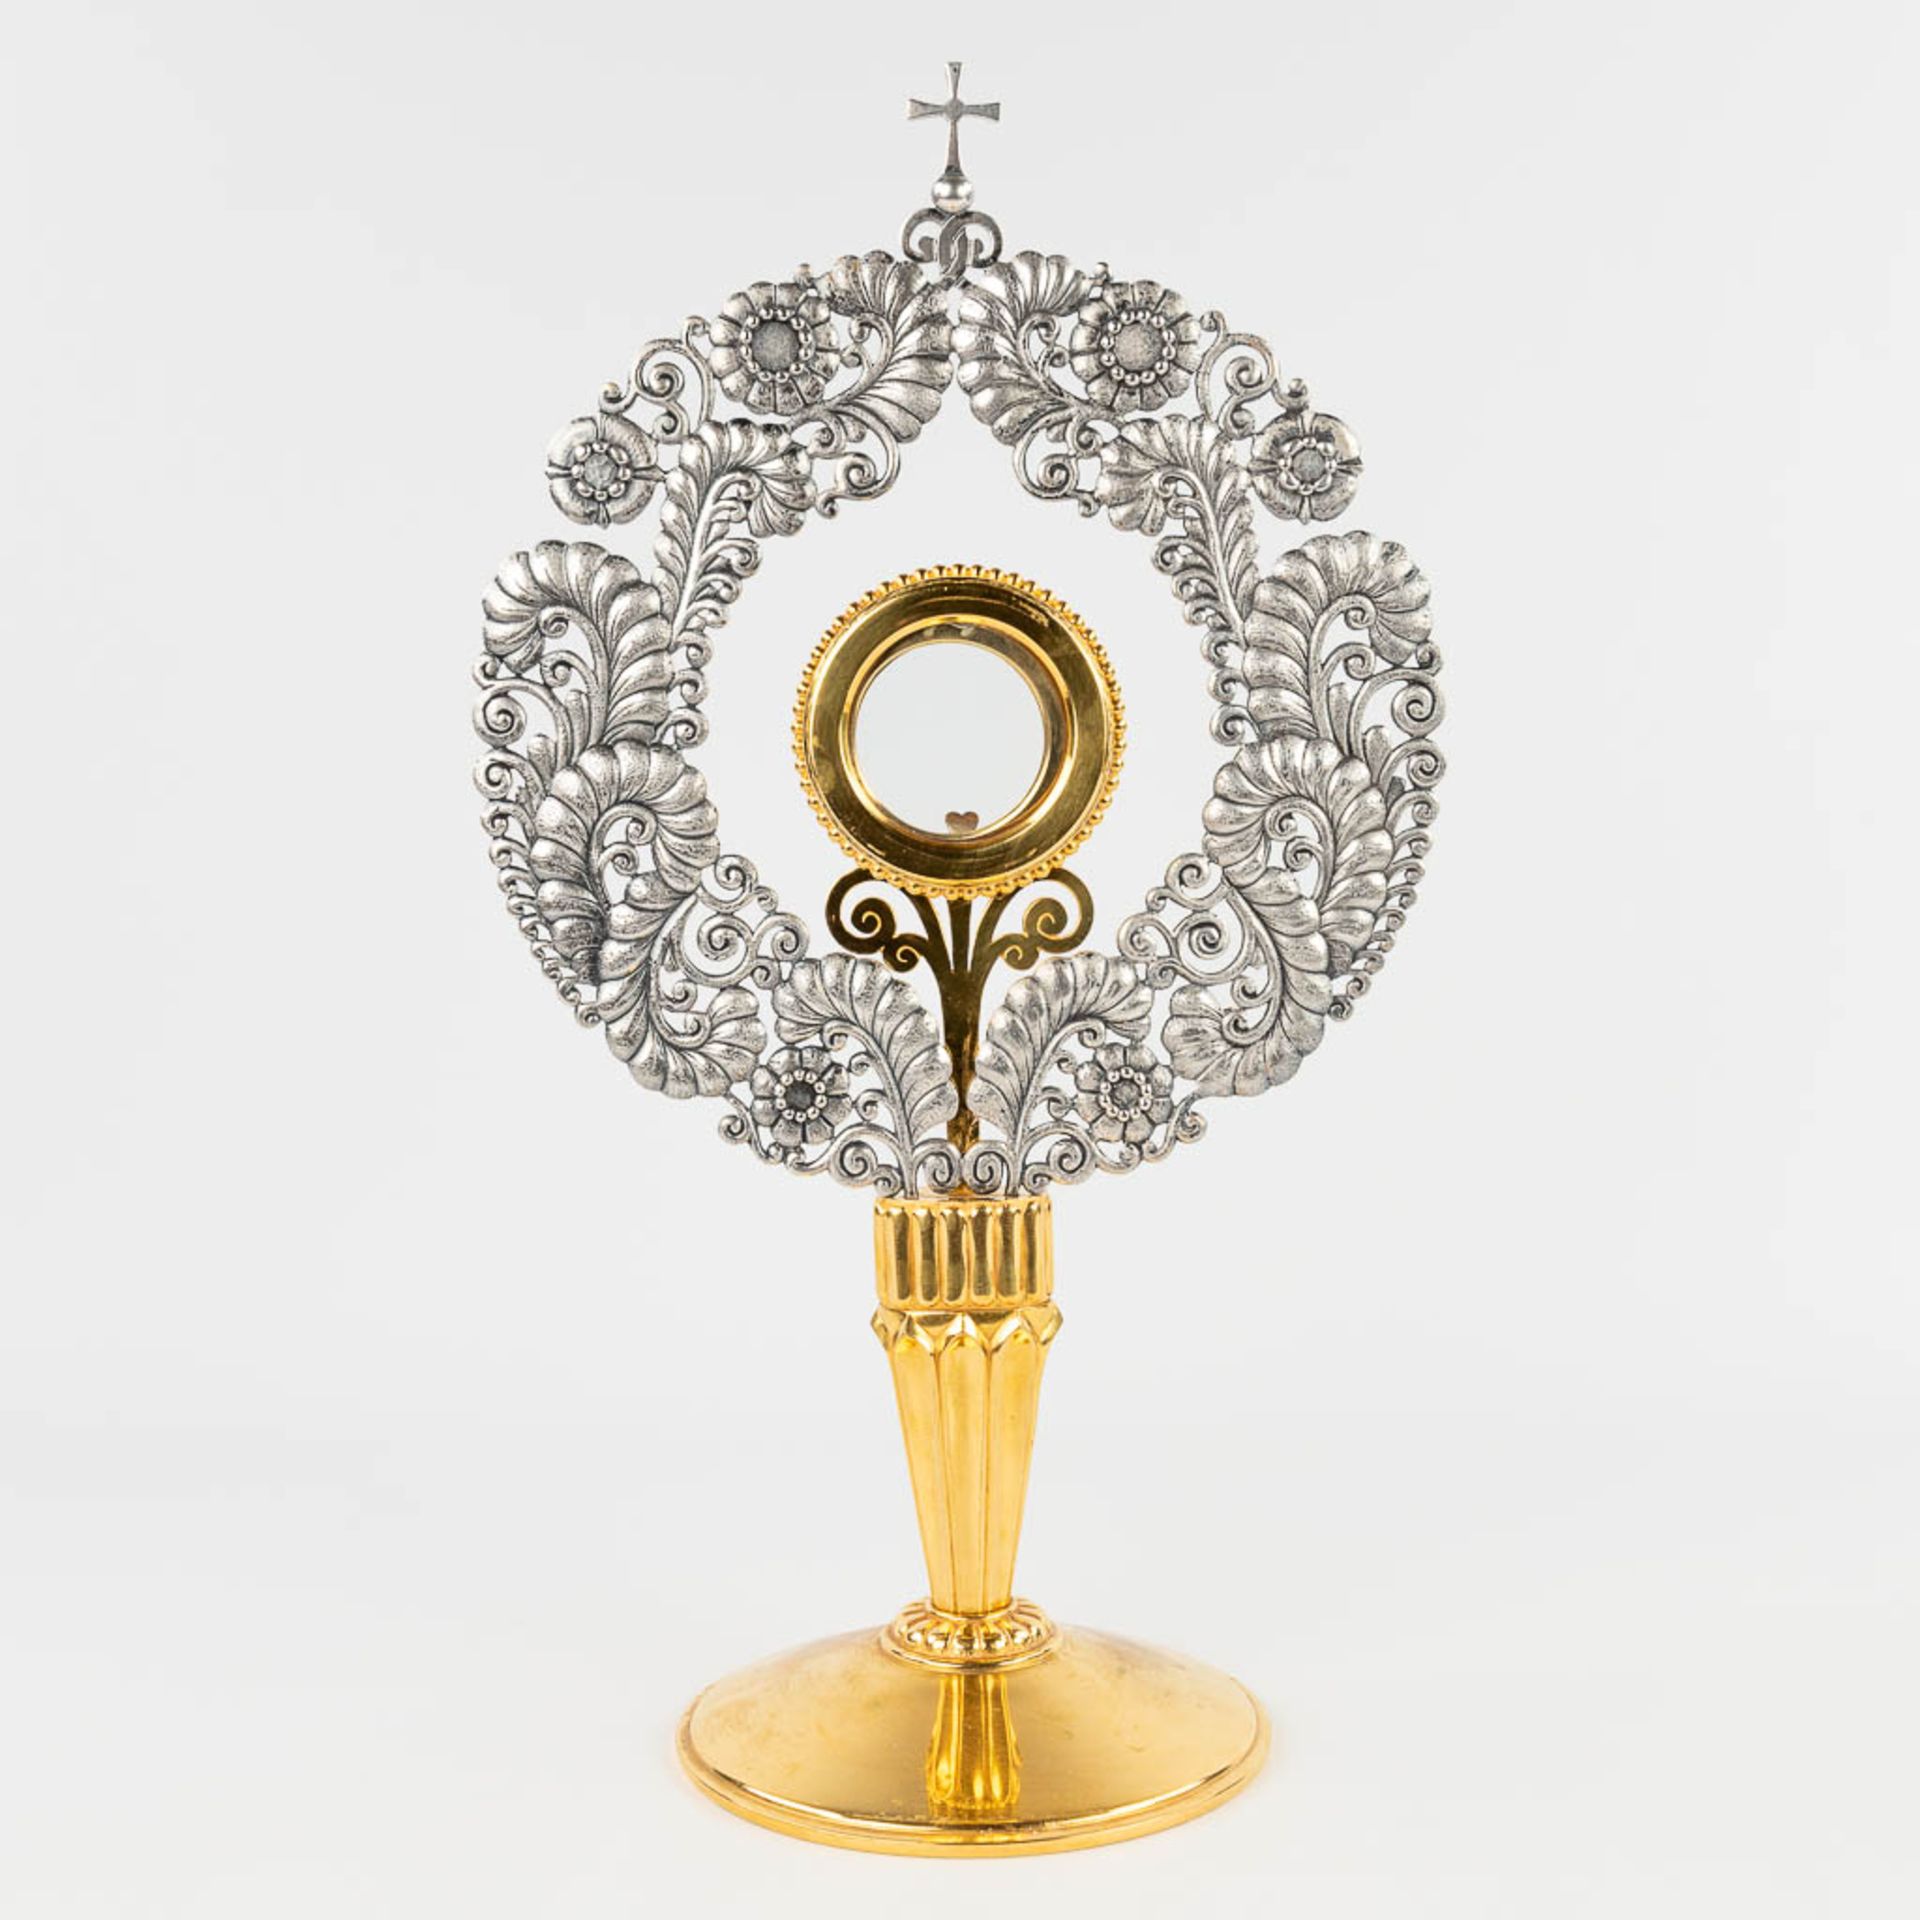 A modernist monstrance, silver-plated decorated with flowers and branches. 20th C. (L: 18 x W: 28 x